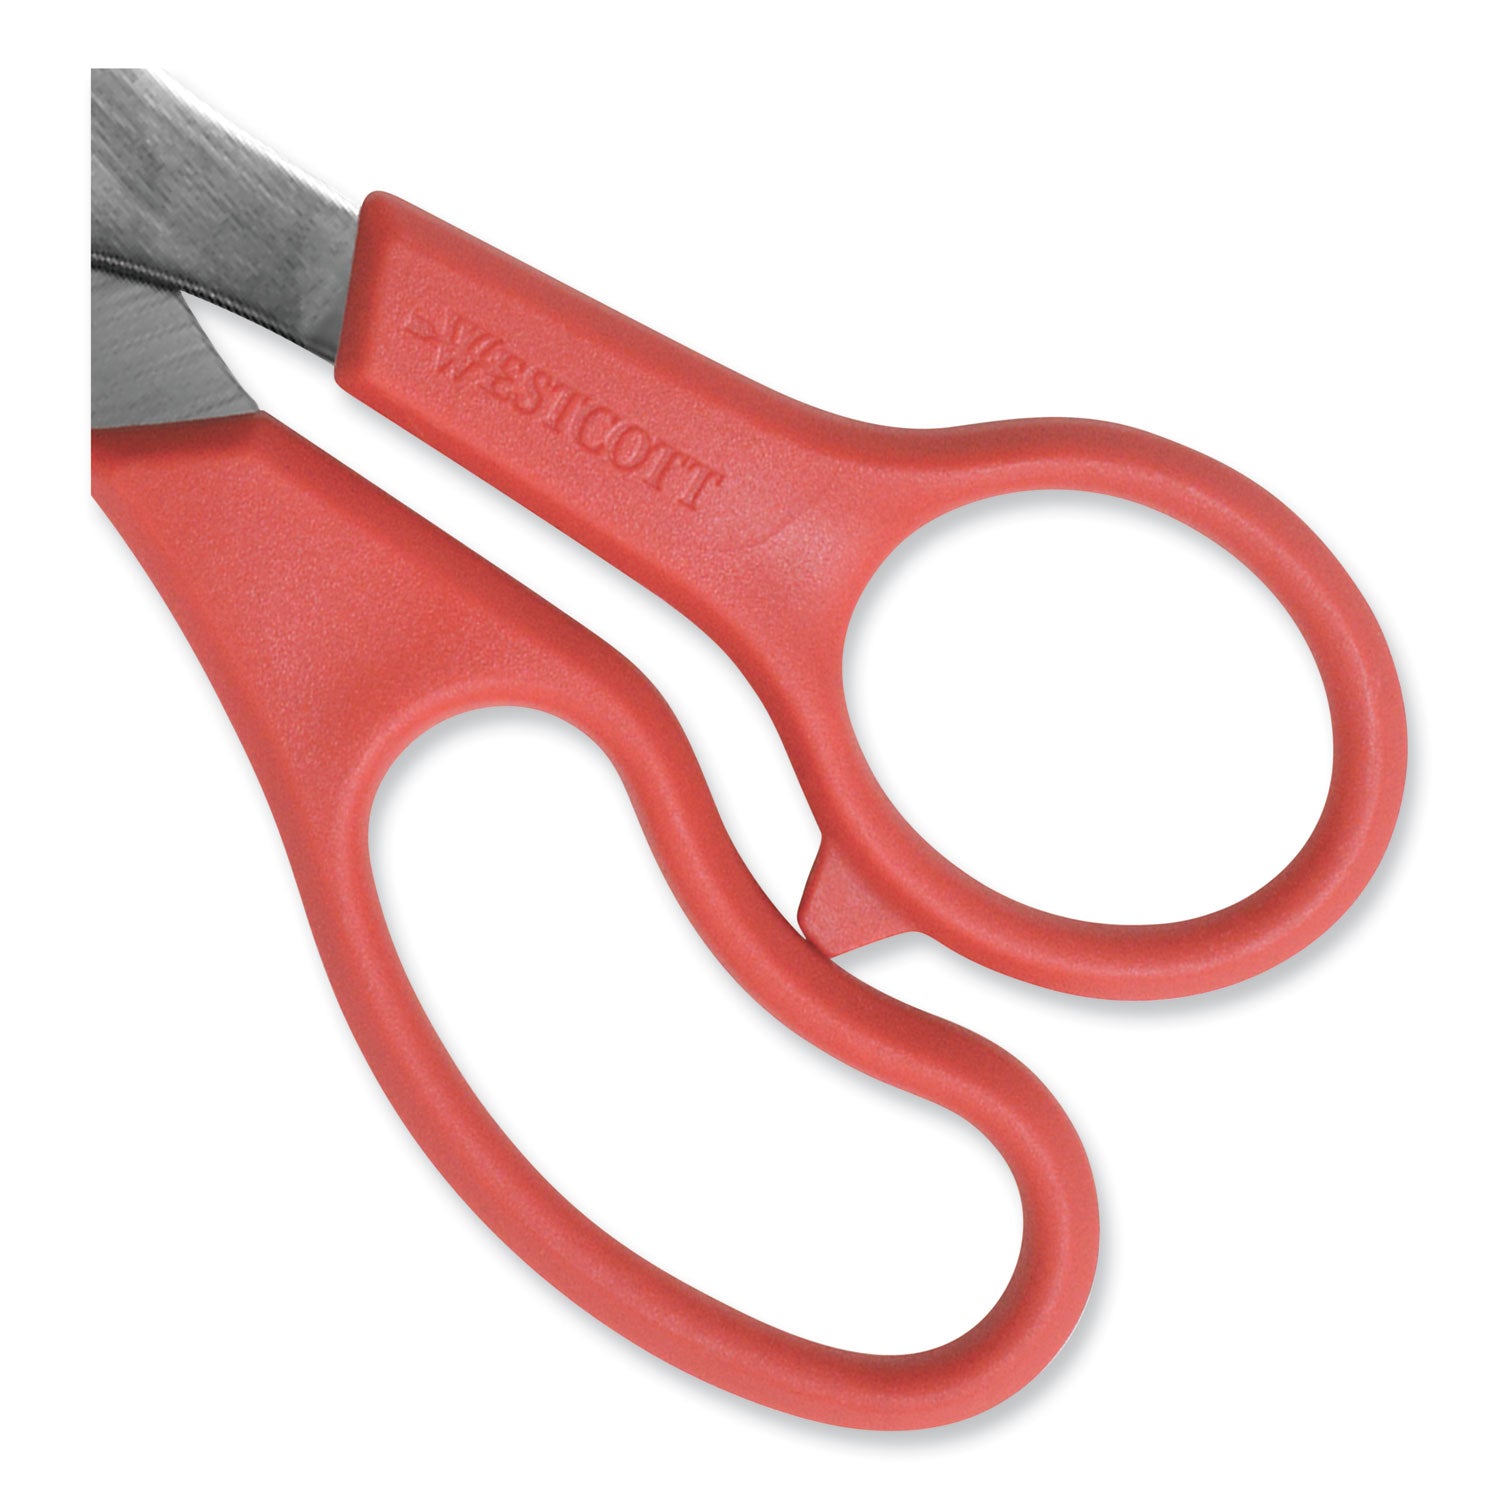 Value Line Stainless Steel Shears, 8" Long, 3.5" Cut Length, Red Straight Handle - 